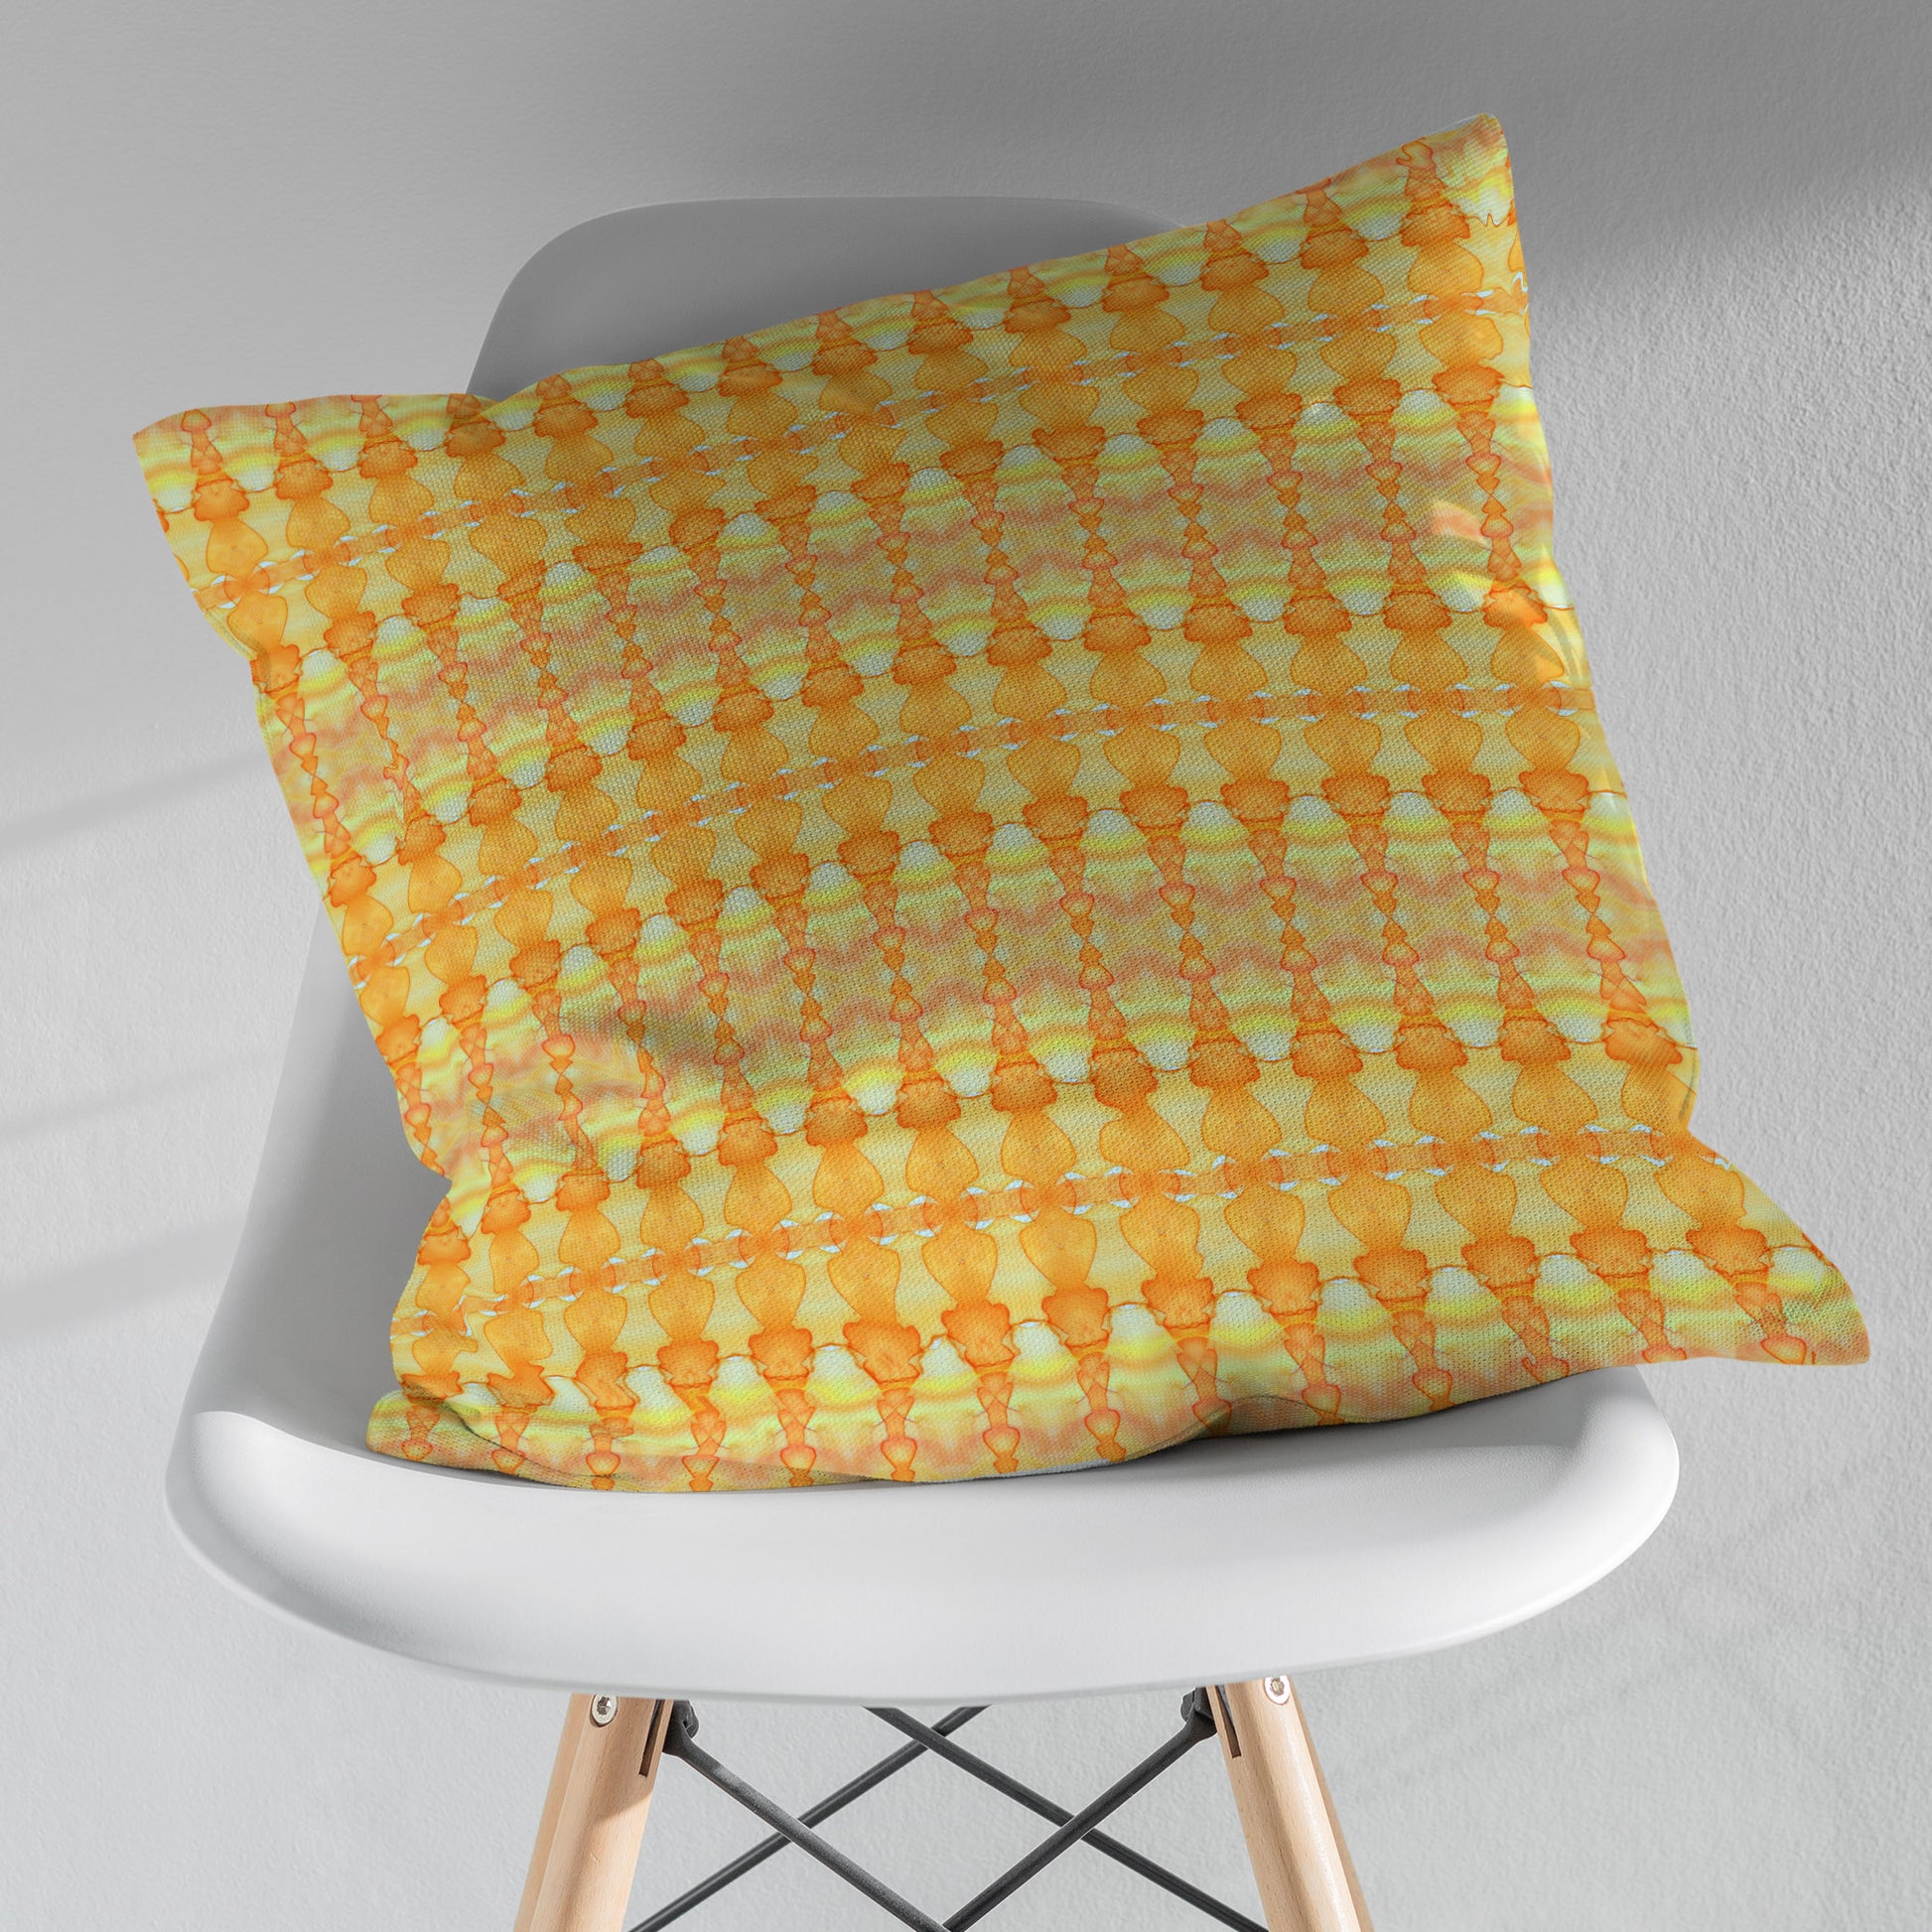 Throw pillow featuring a yellow and orange abstract pattern sitting on a white modern chair